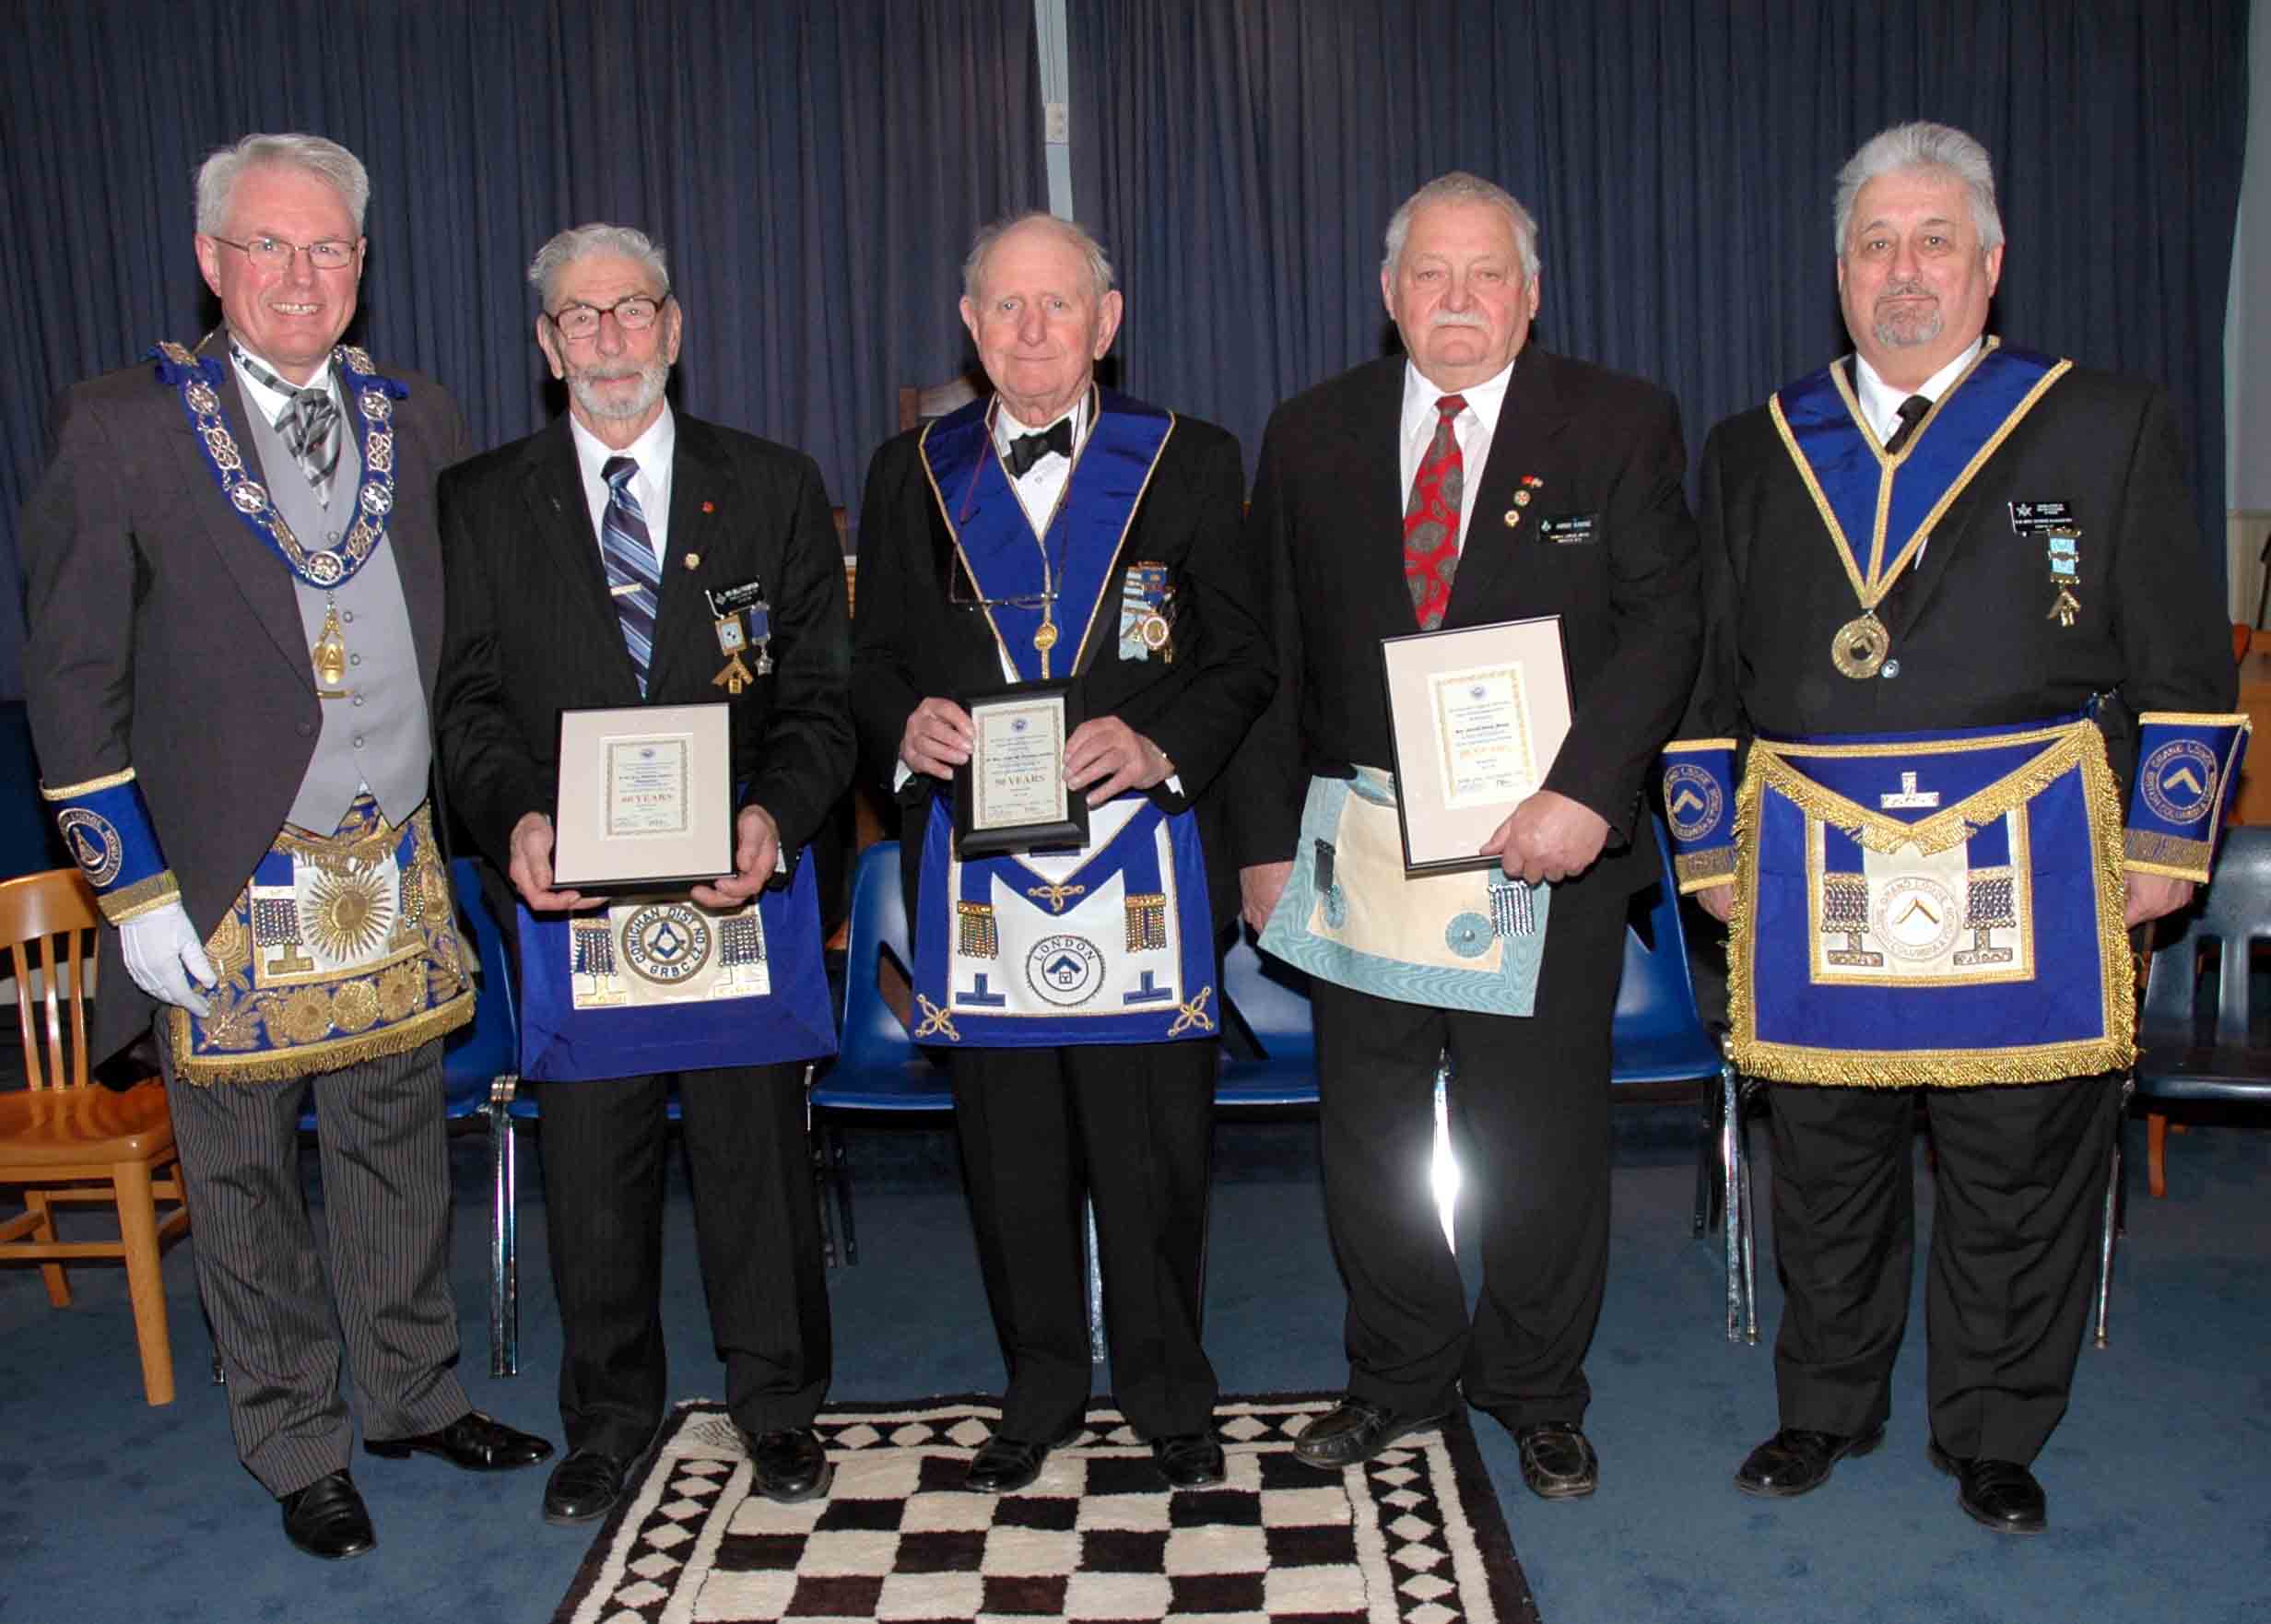 Awards-Grand master's Official Visit on 1 March 2014